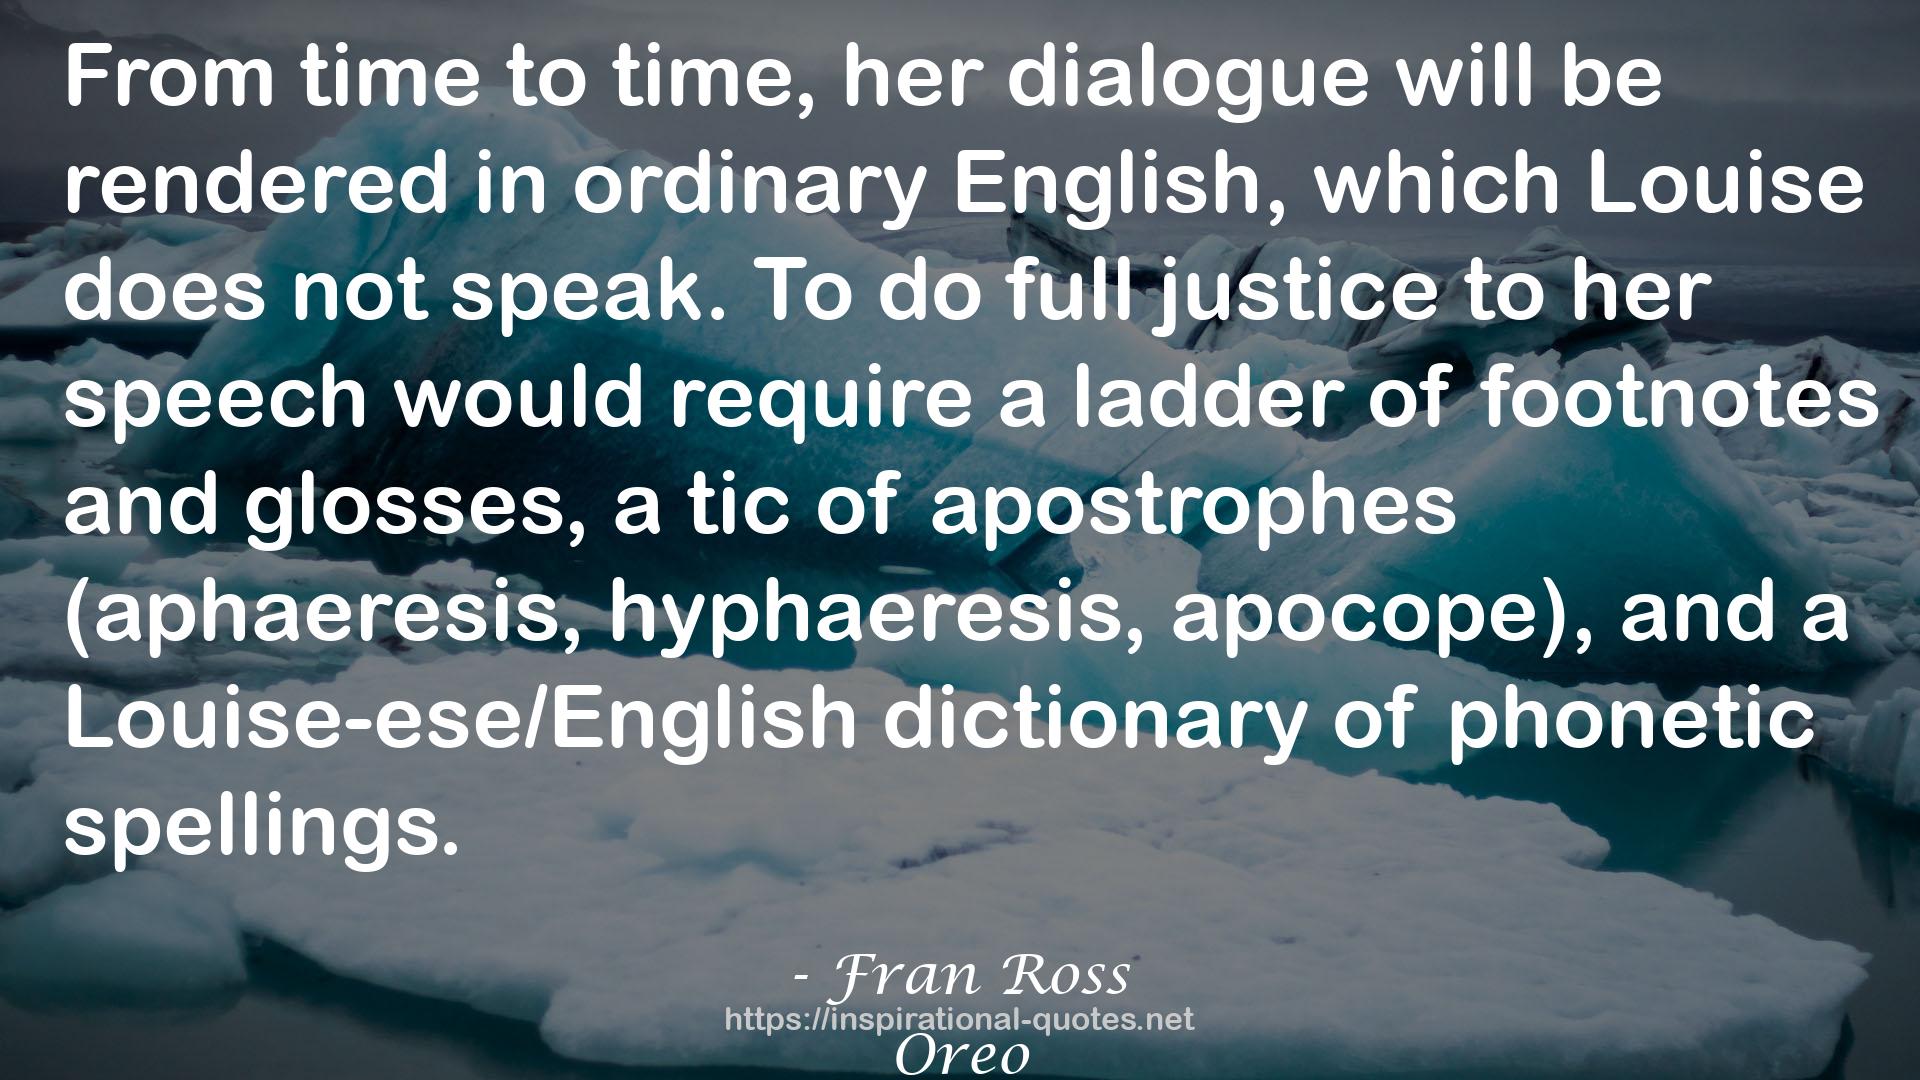 Fran Ross QUOTES